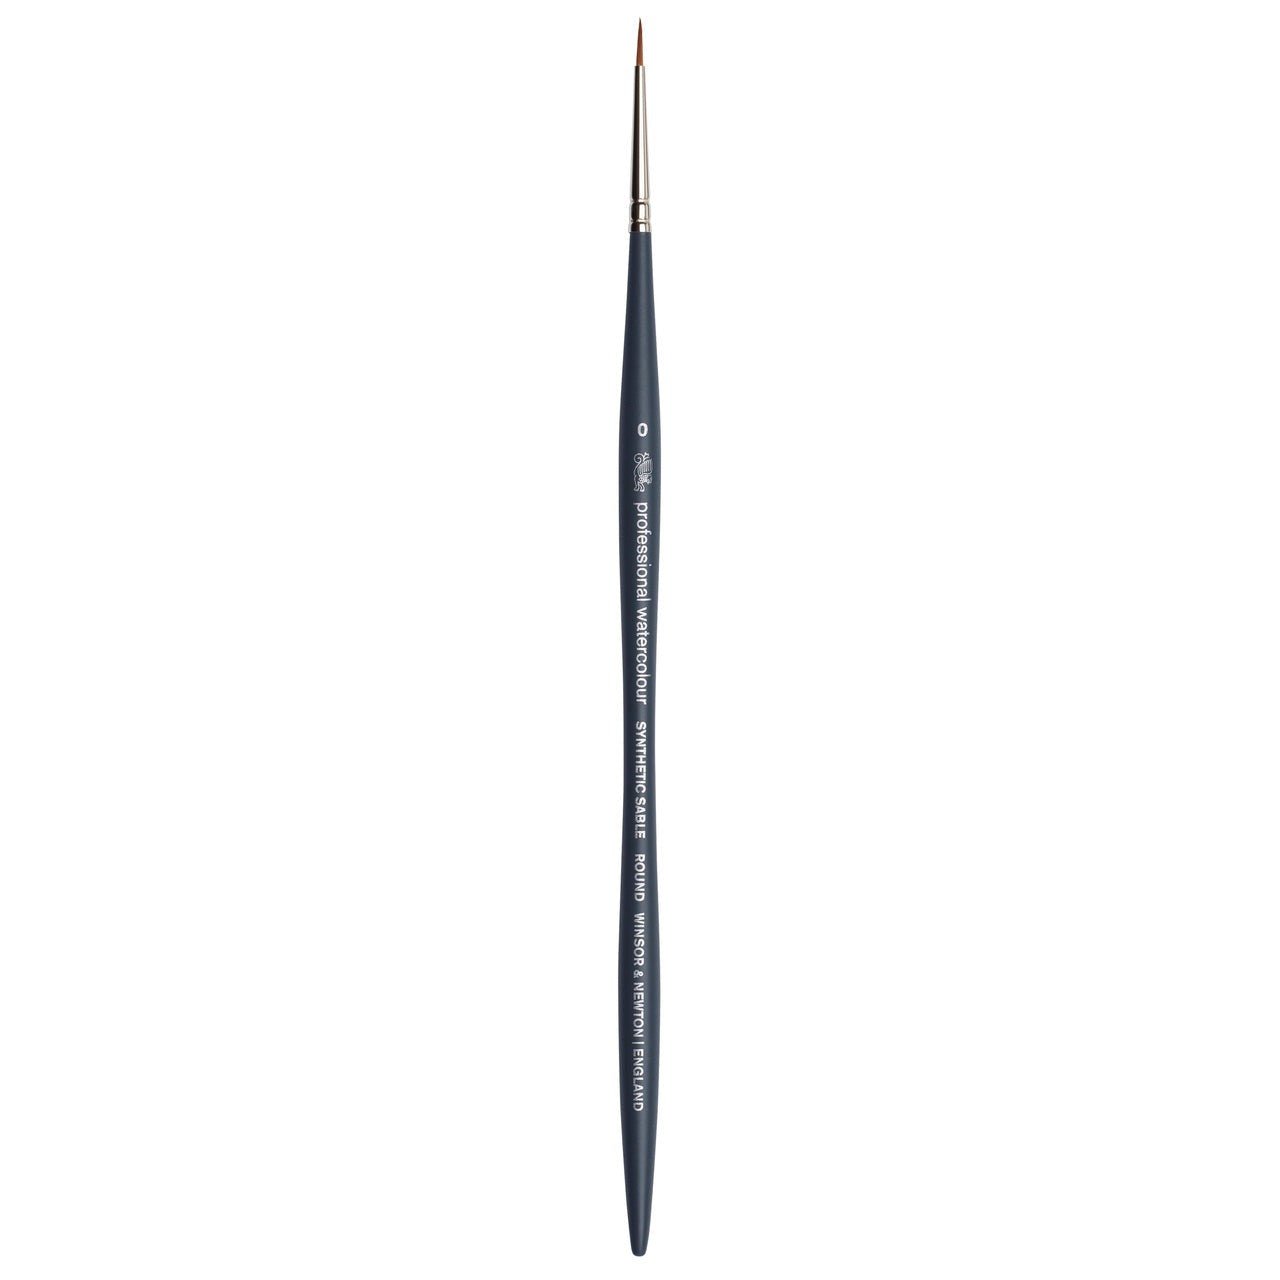 Winsor & Newton Professional Watercolor Synthetic Sable Brush - Round 0 - merriartist.com